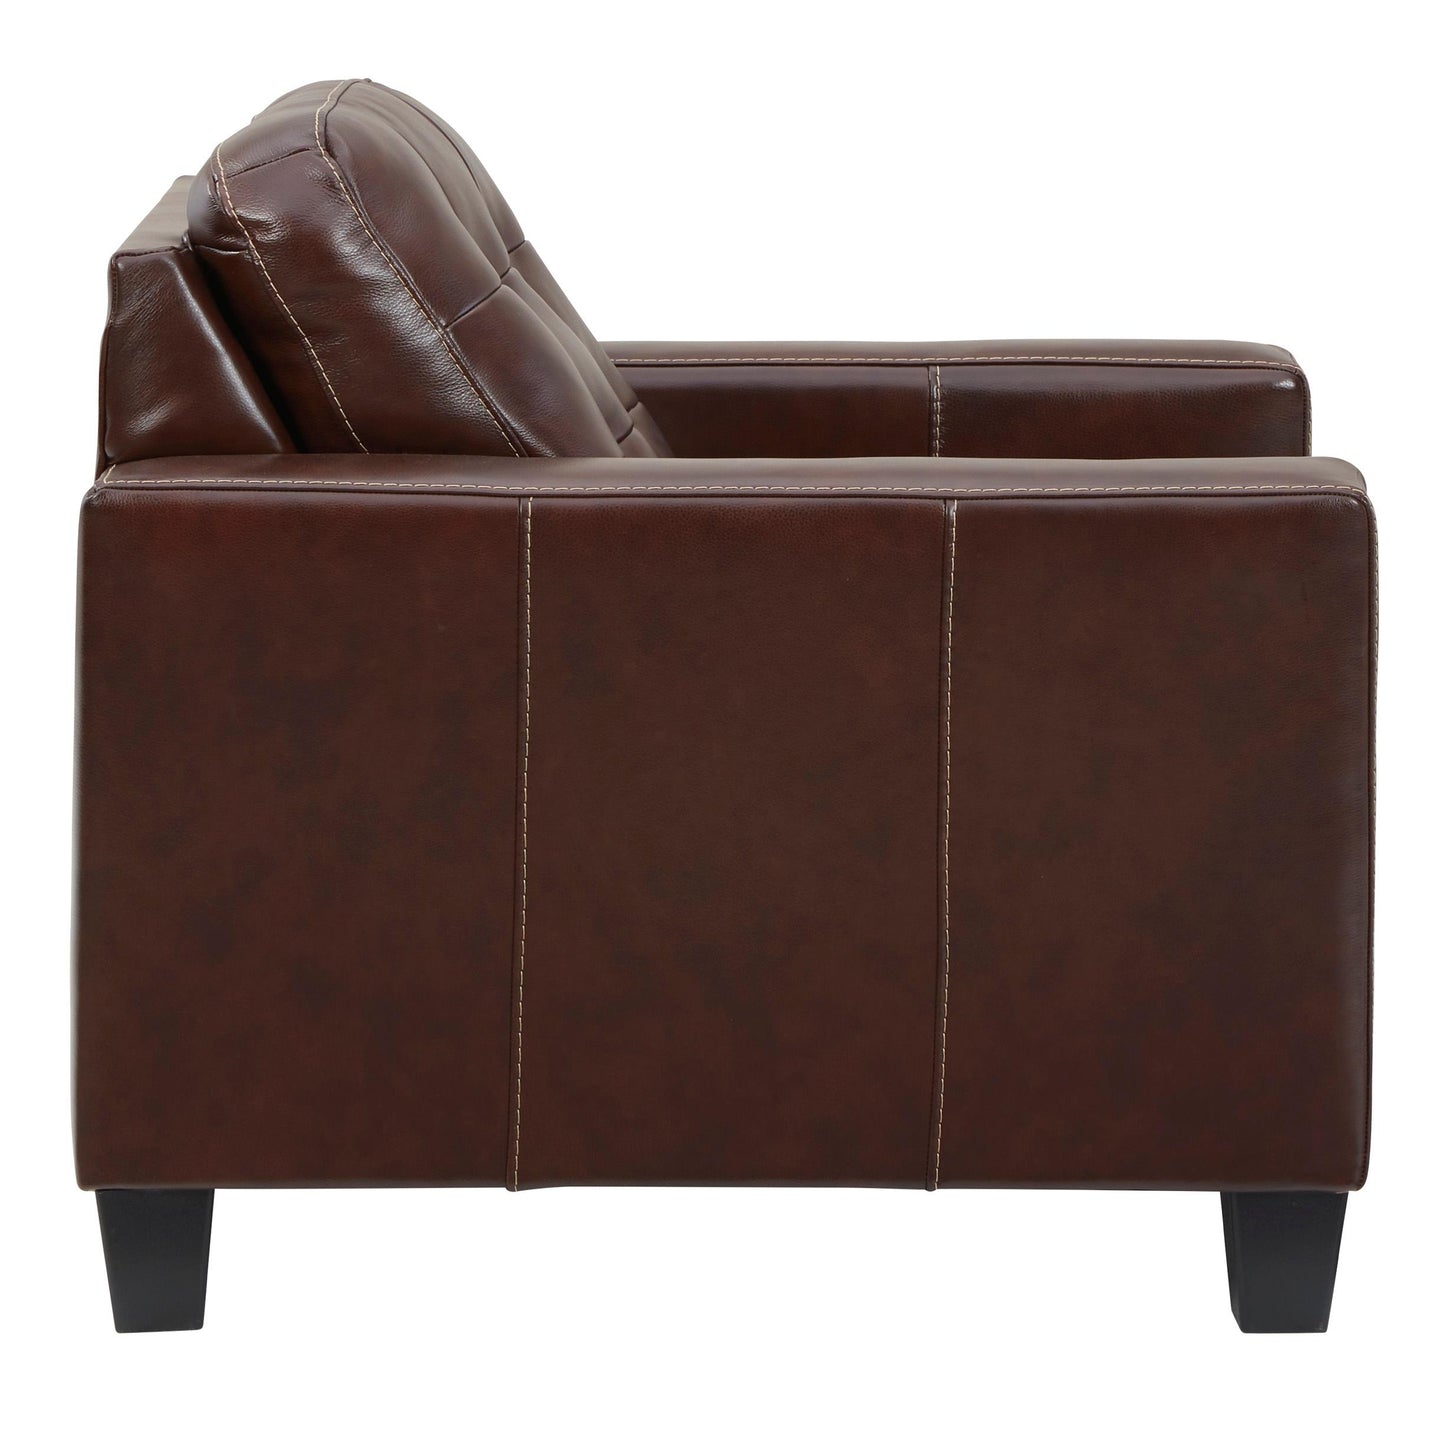 Signature Design by Ashley Altonbury Stationary Leather Match Chair 8750420